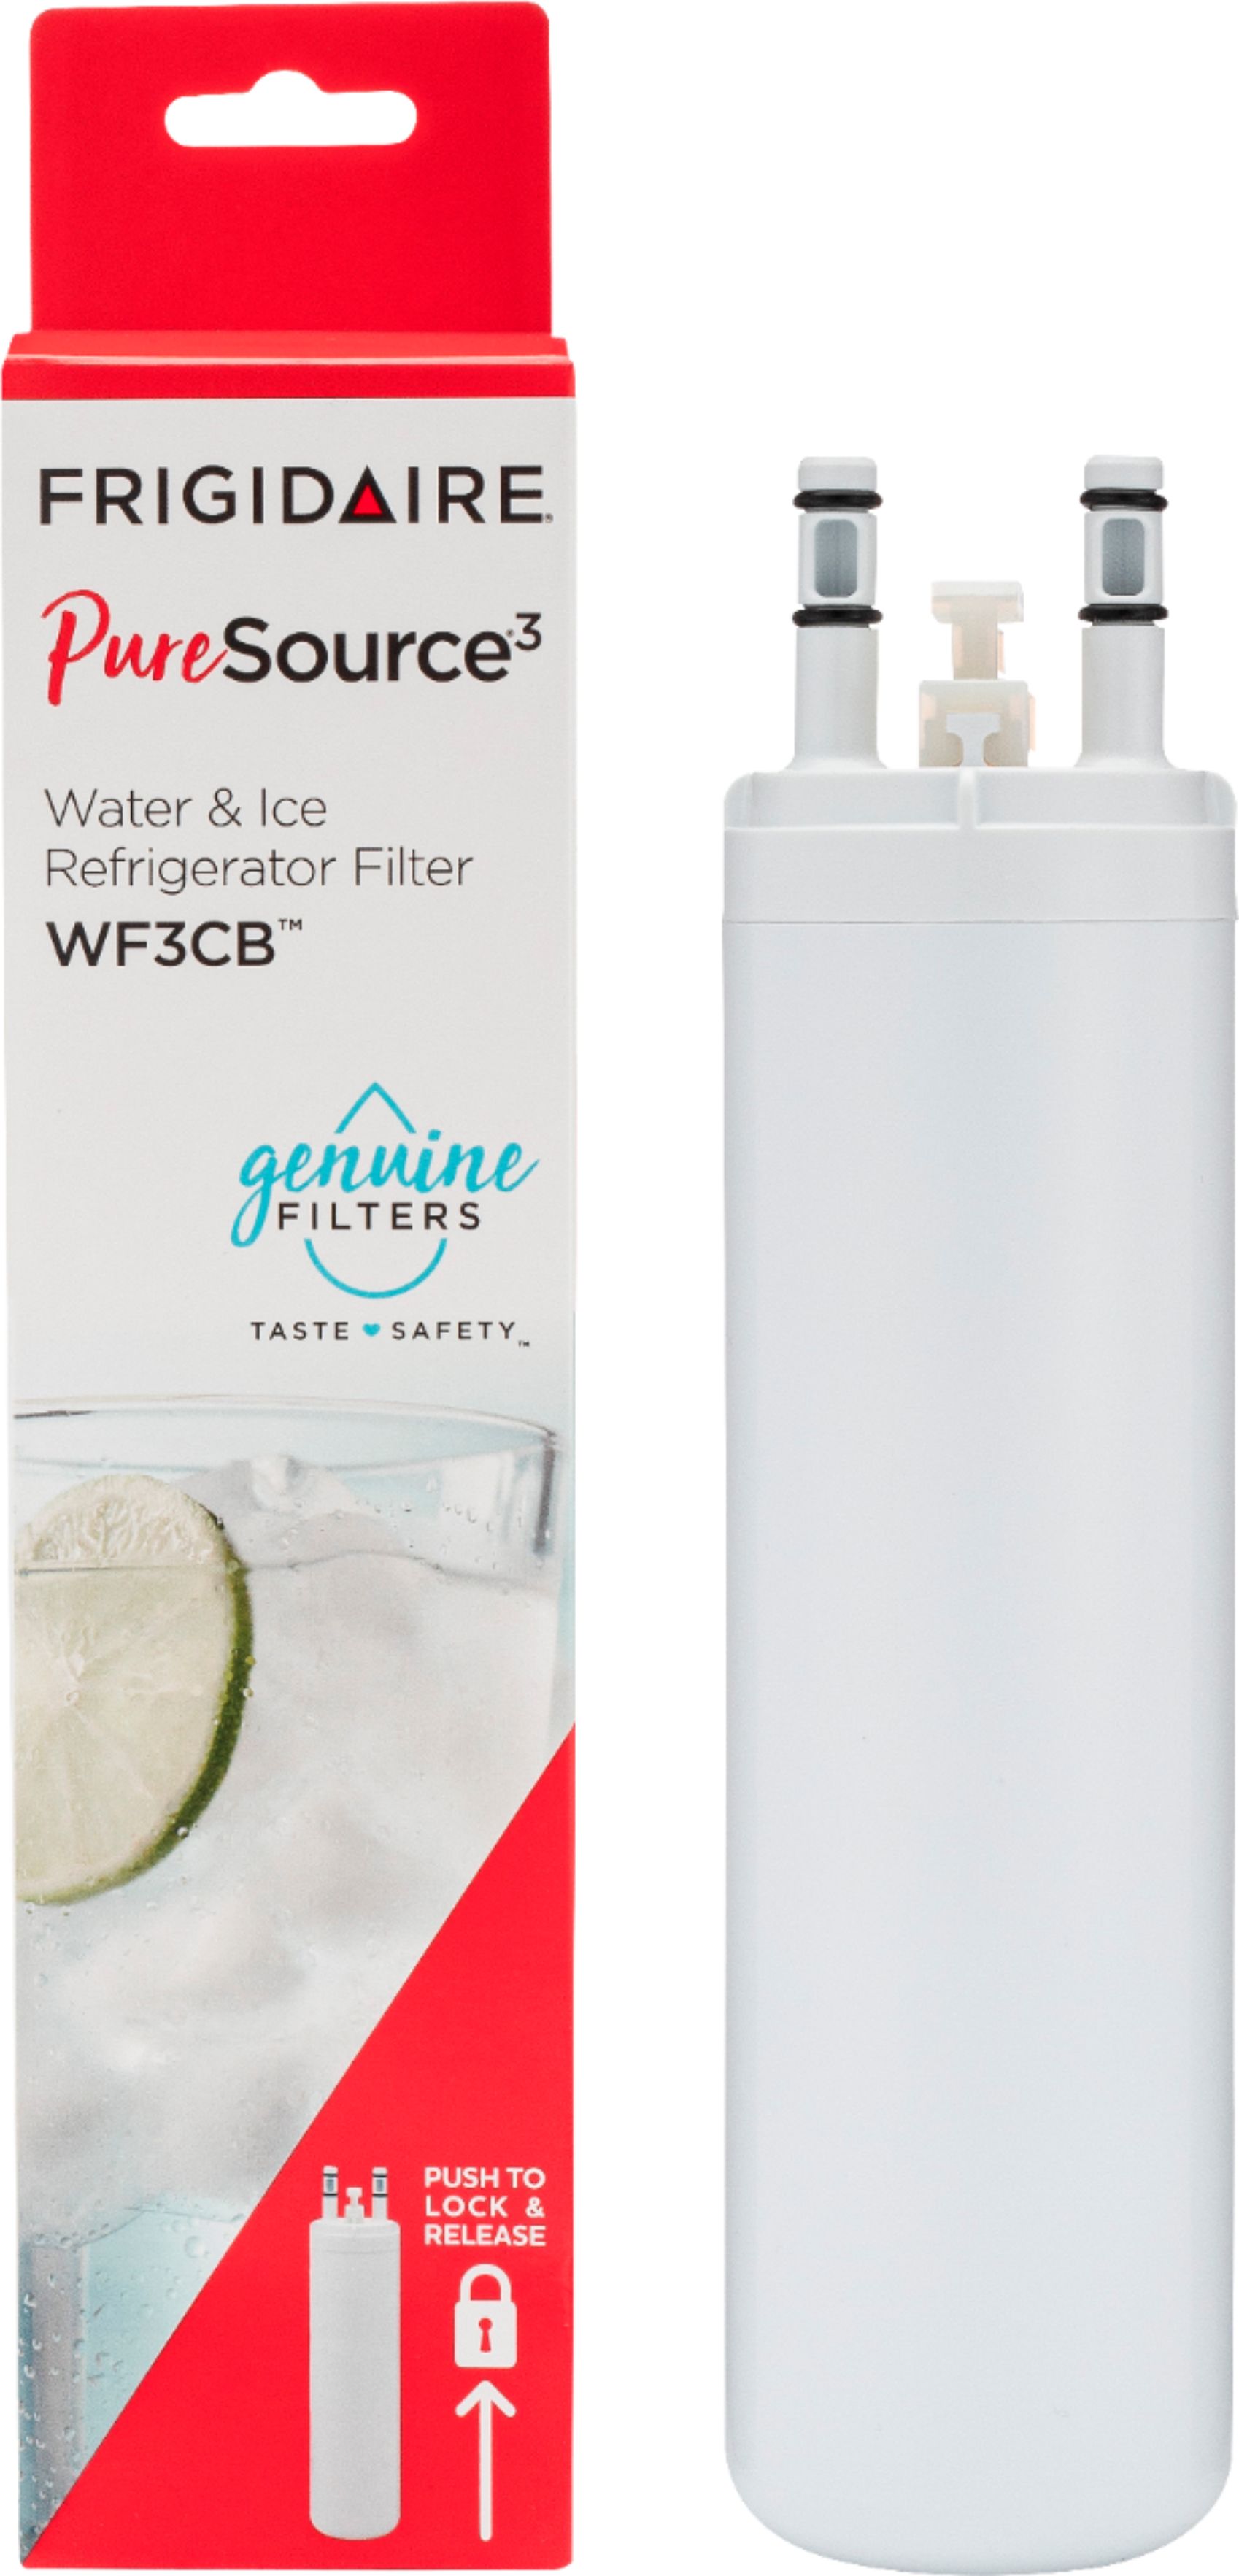 ＷF3CB Compatible Refrigerator Water Filter Replacement Pure Source 3 white 2packs